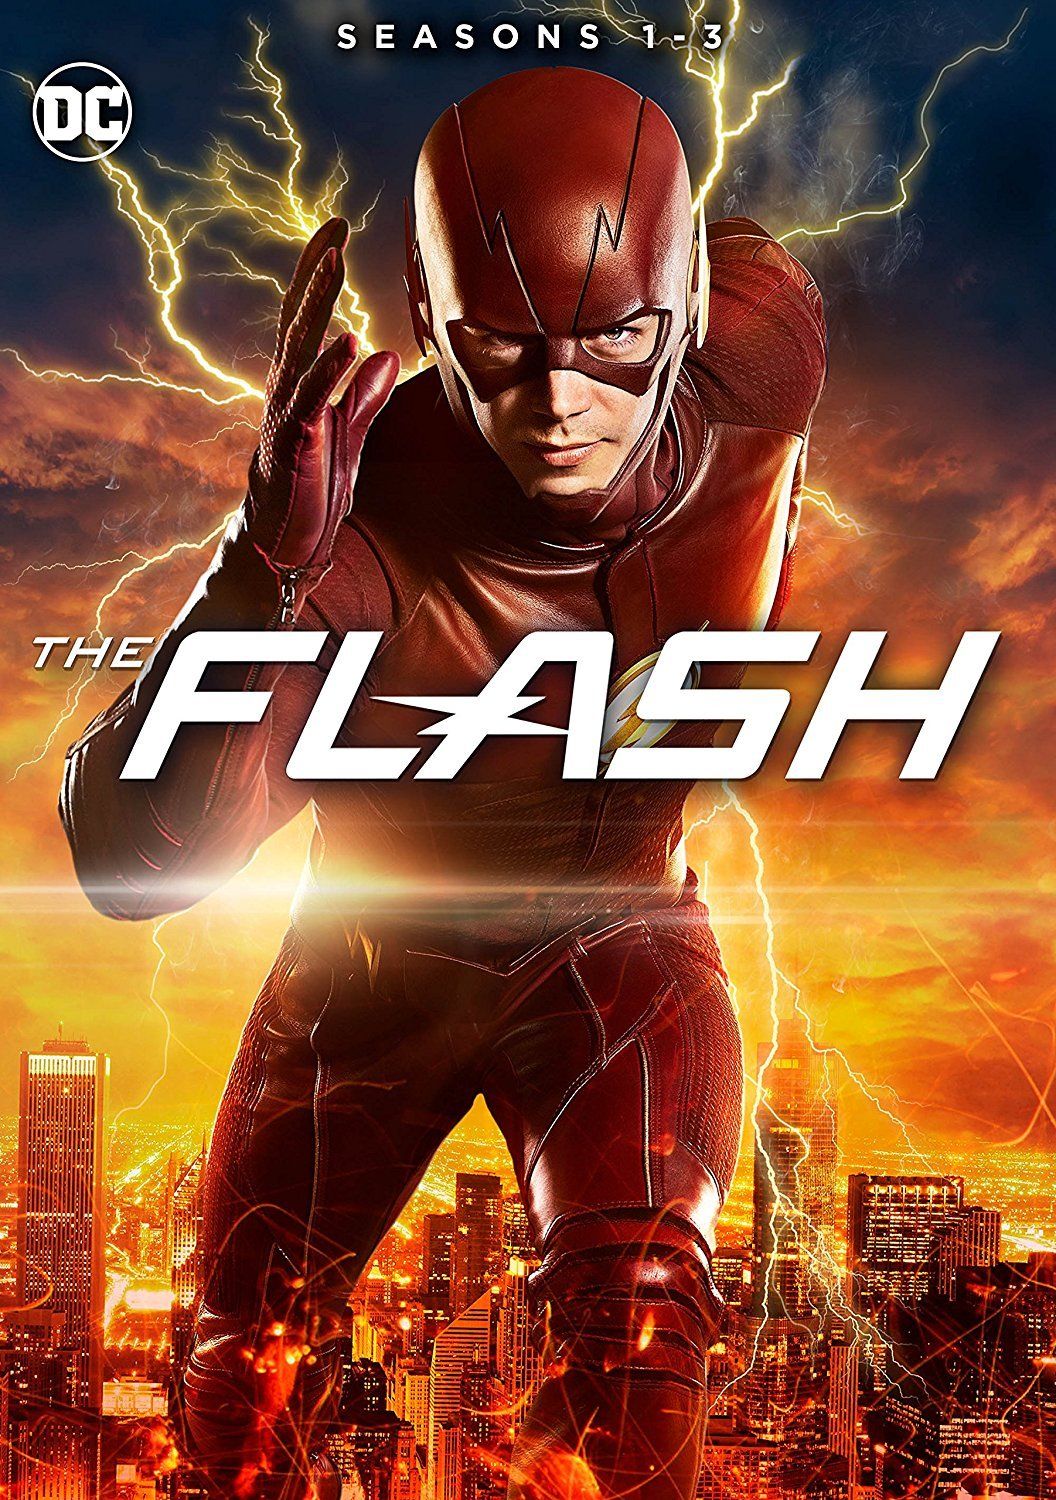 The Flash (Season 1) Hindi Dubbed All Episodes download full movie